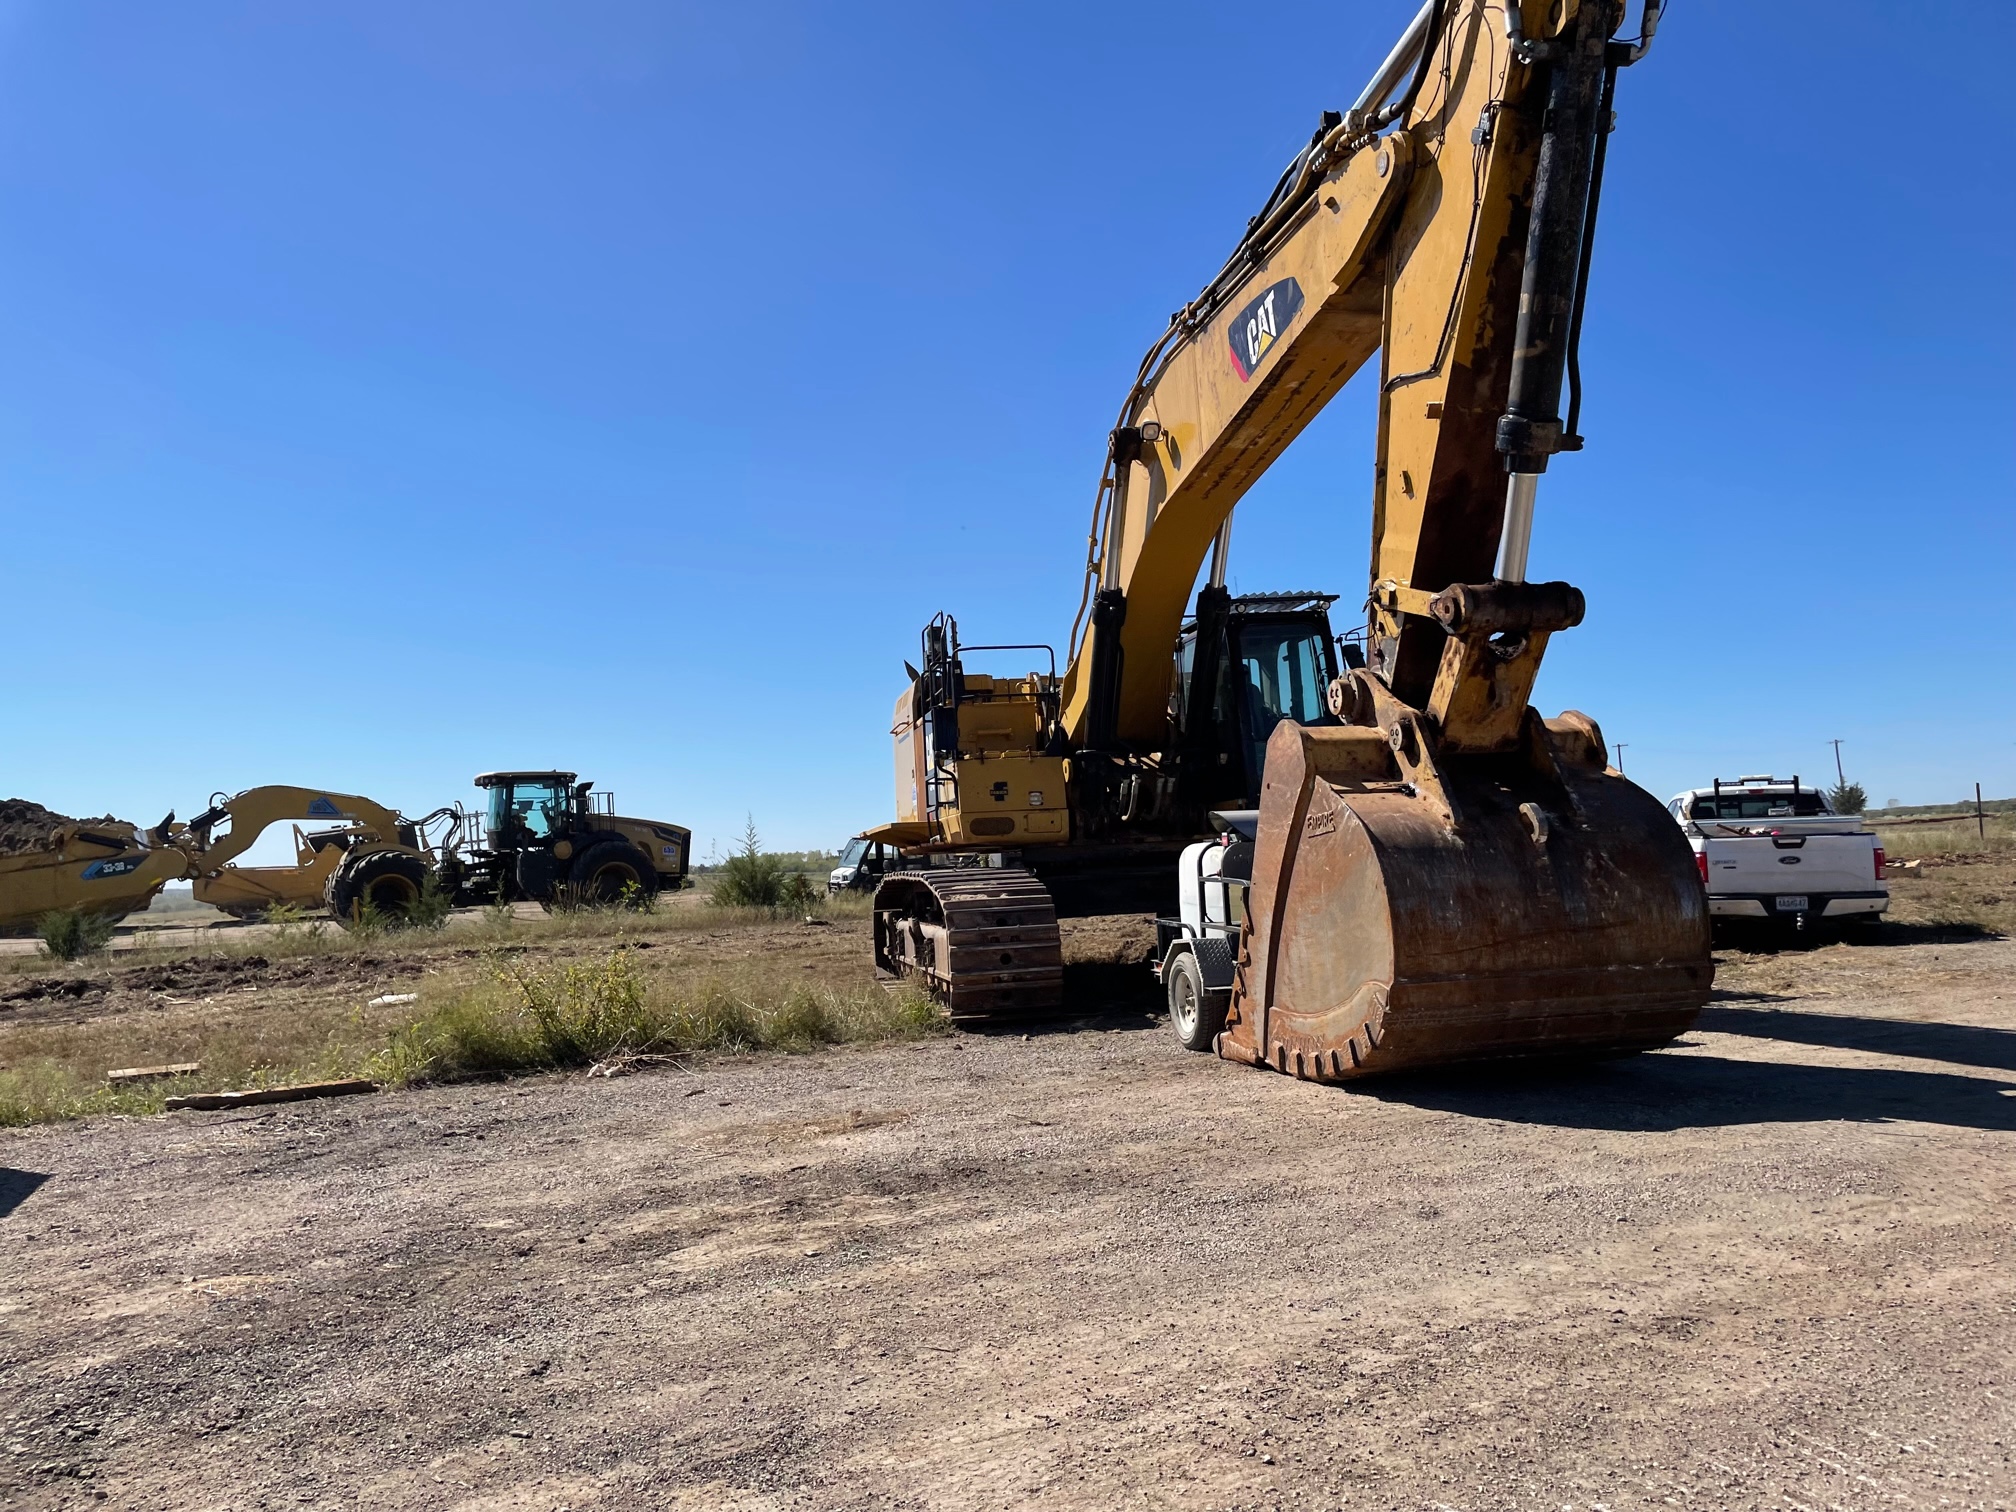 An excavator breaks ground at the site of the new Panasonic EV battery facility in De Soto, Kansas.